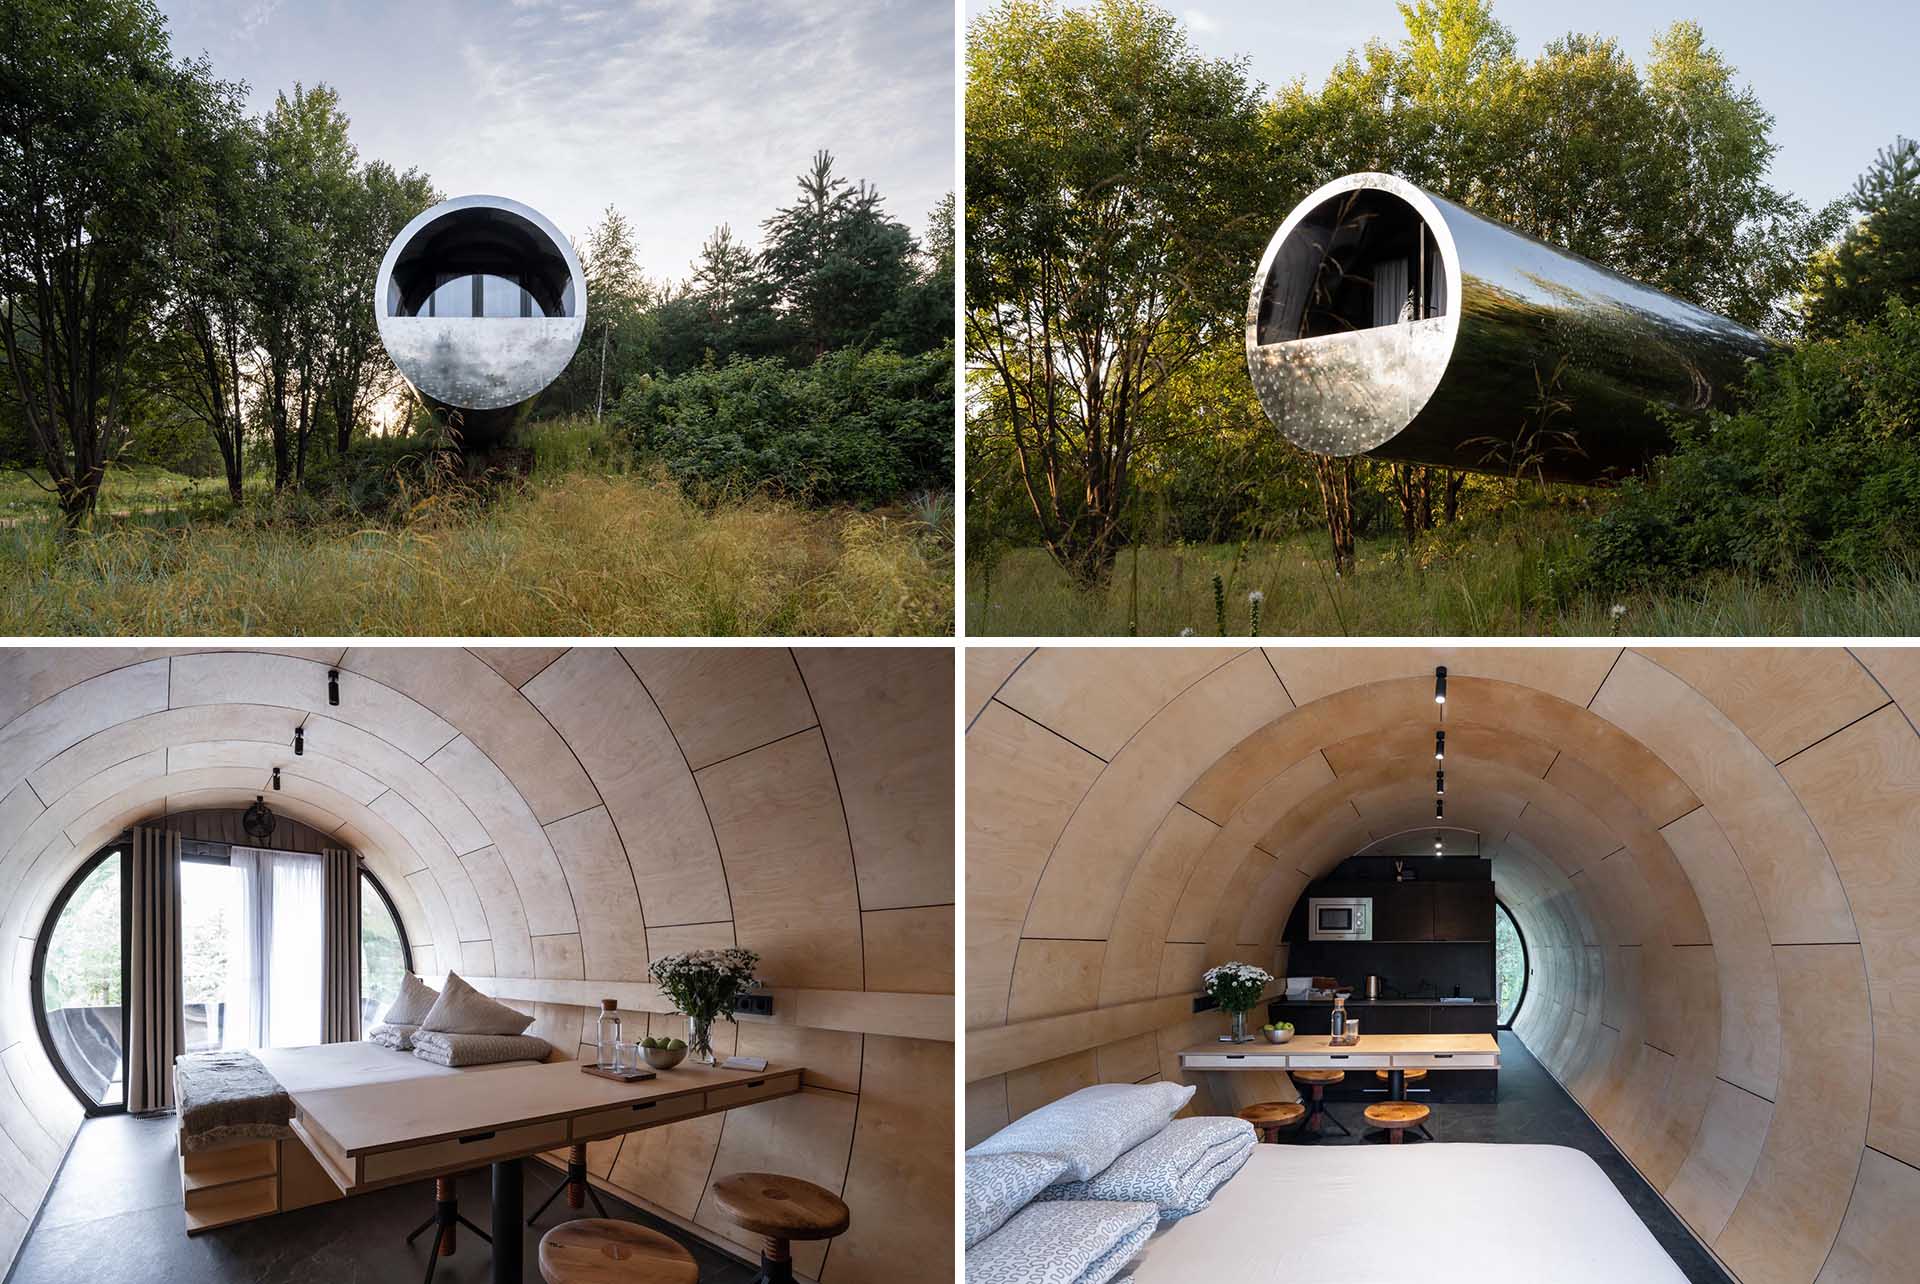 A unique tube-inspired cabin with a stainless steel exterior and a wood-lined interior.